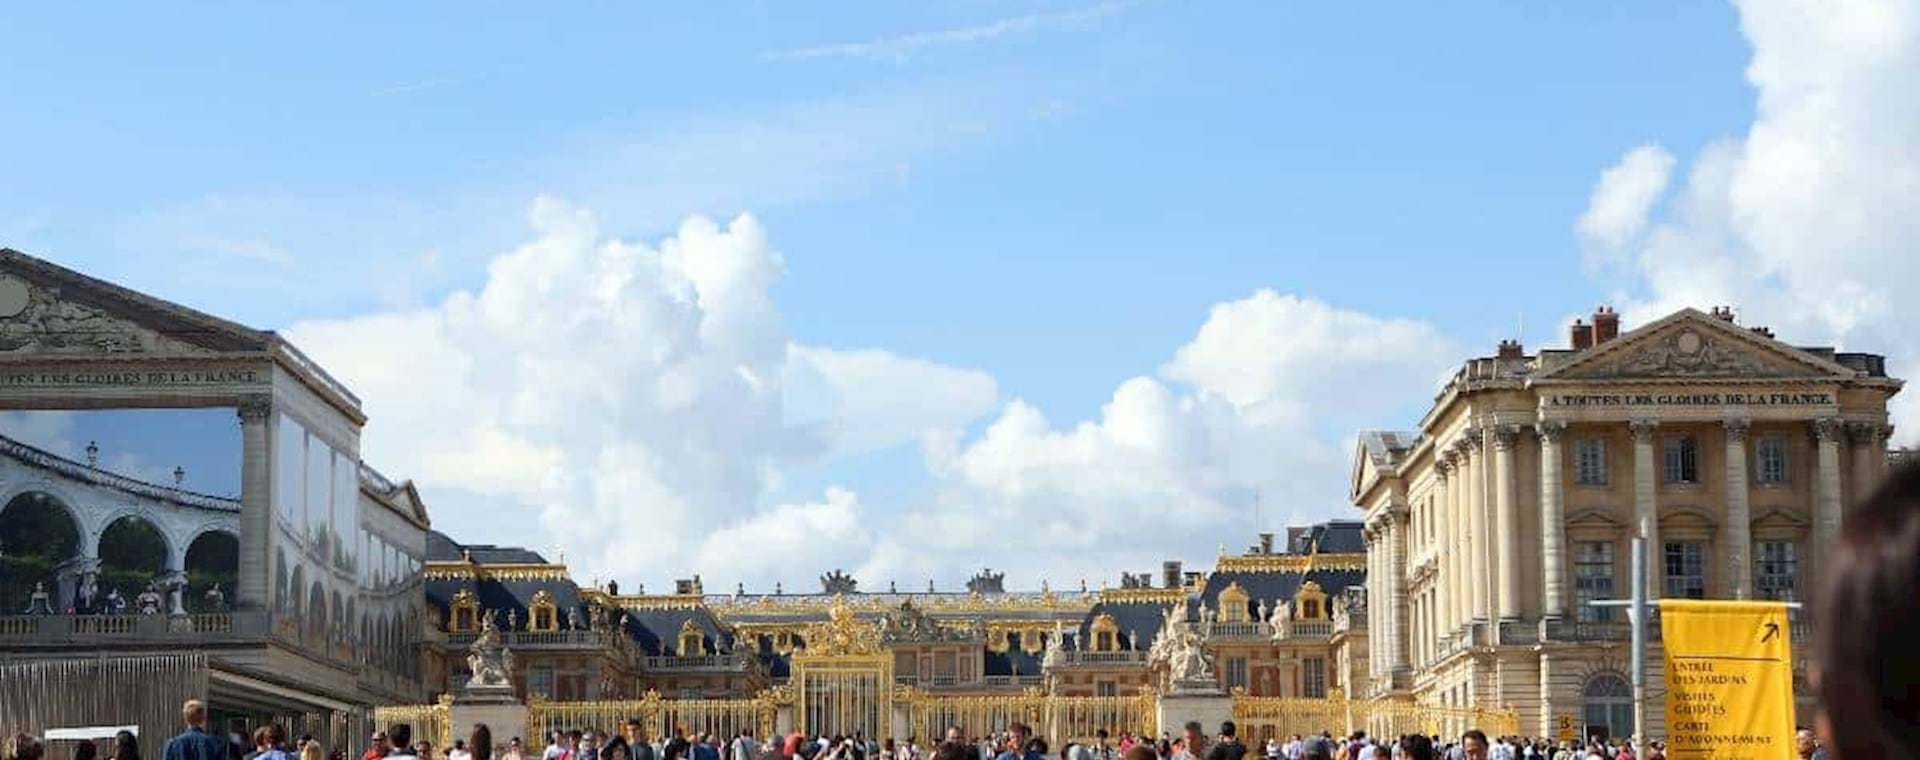 Guided walking tour of the Versailles Palace